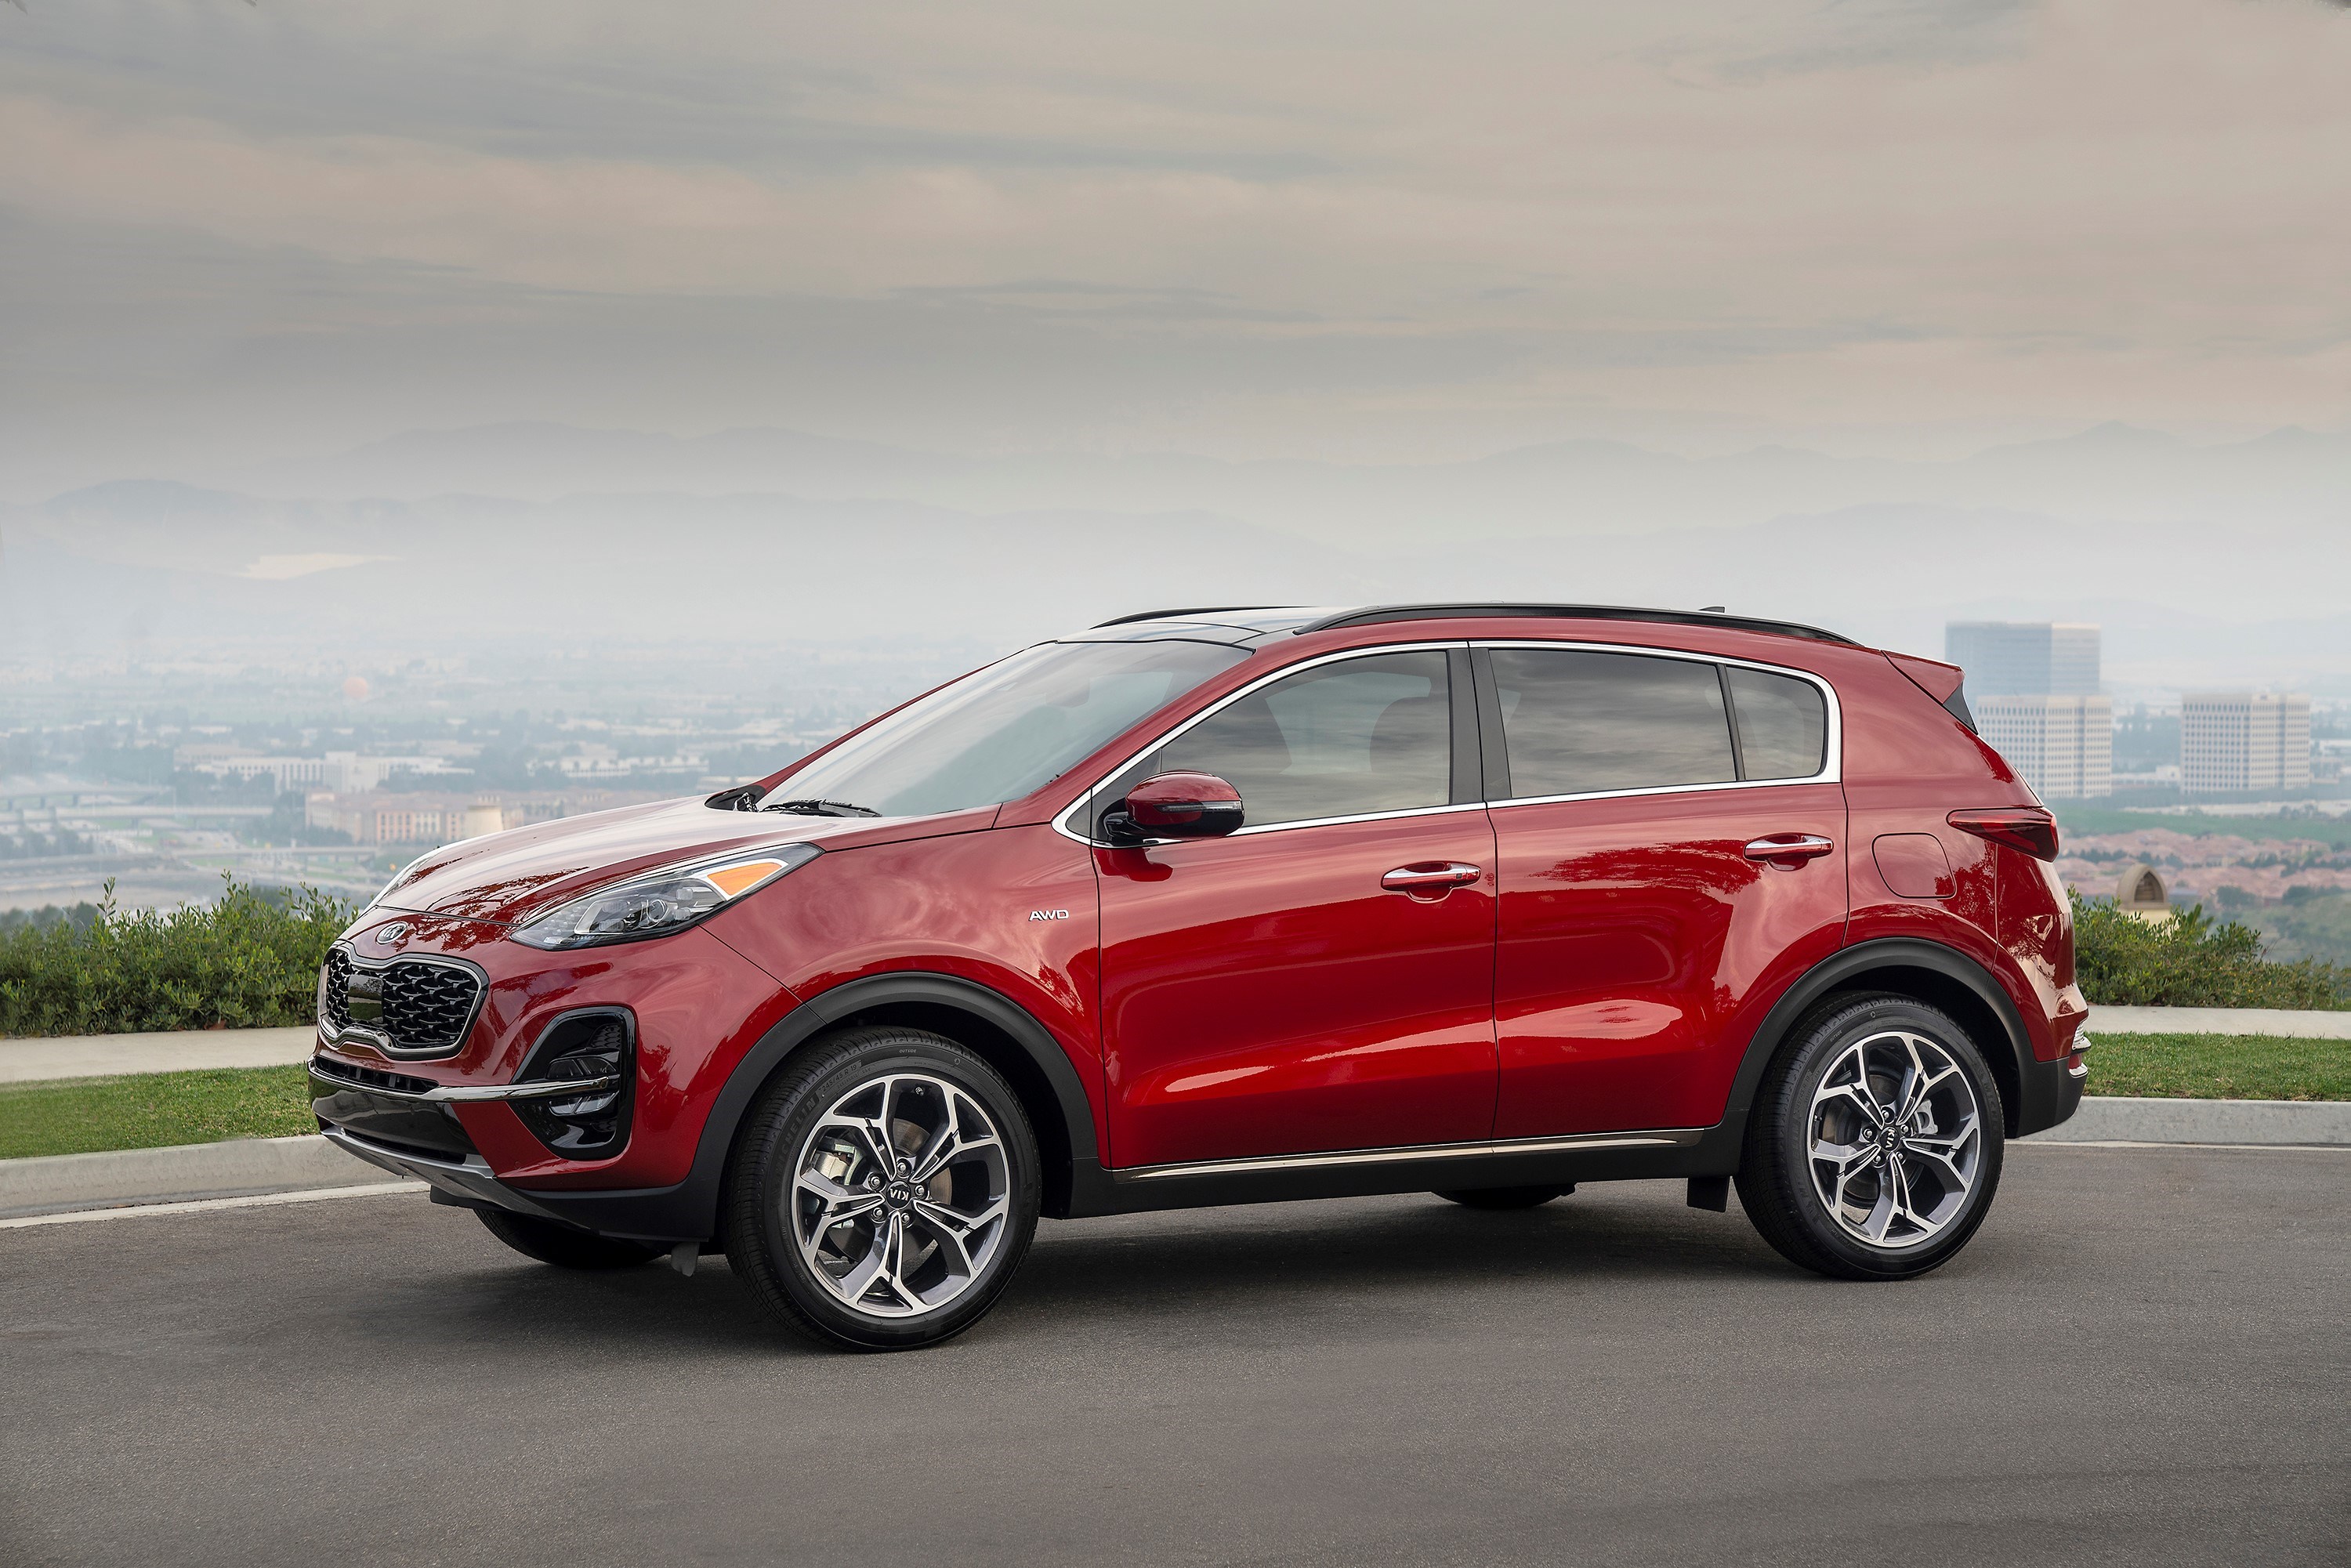 2020 Kia Sportage Review, Ratings, Specs, Prices, and Photos - The Car